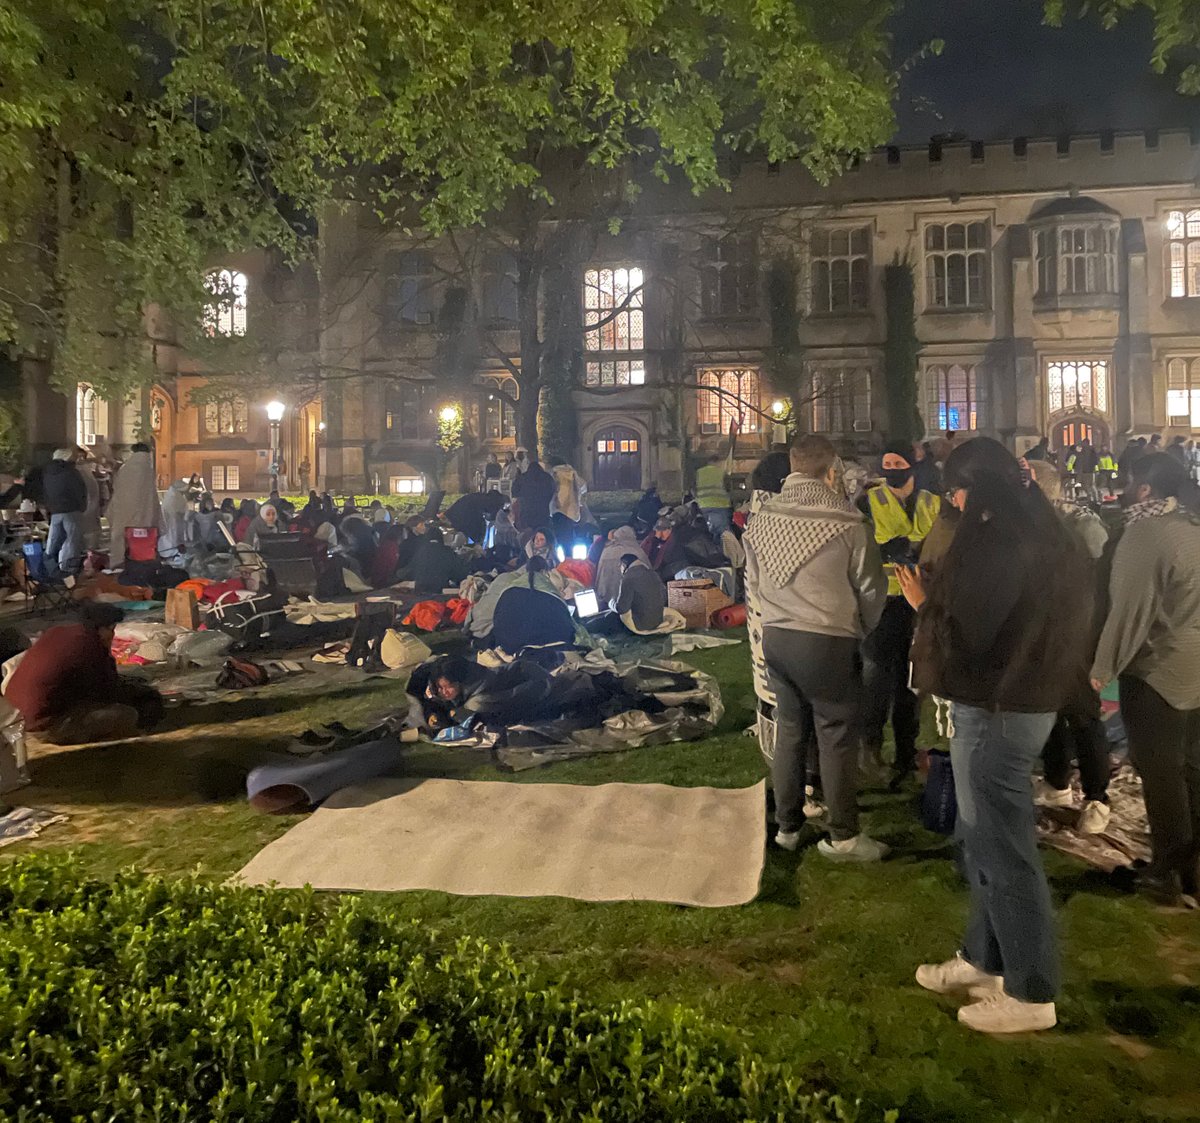 The pro-Palestinian protest at @Princeton continued through the night, with students staying awake after the University said they weren’t allowed to set up tents or sleep outdoors on campus. About 40 remained at 9:45 a.m.